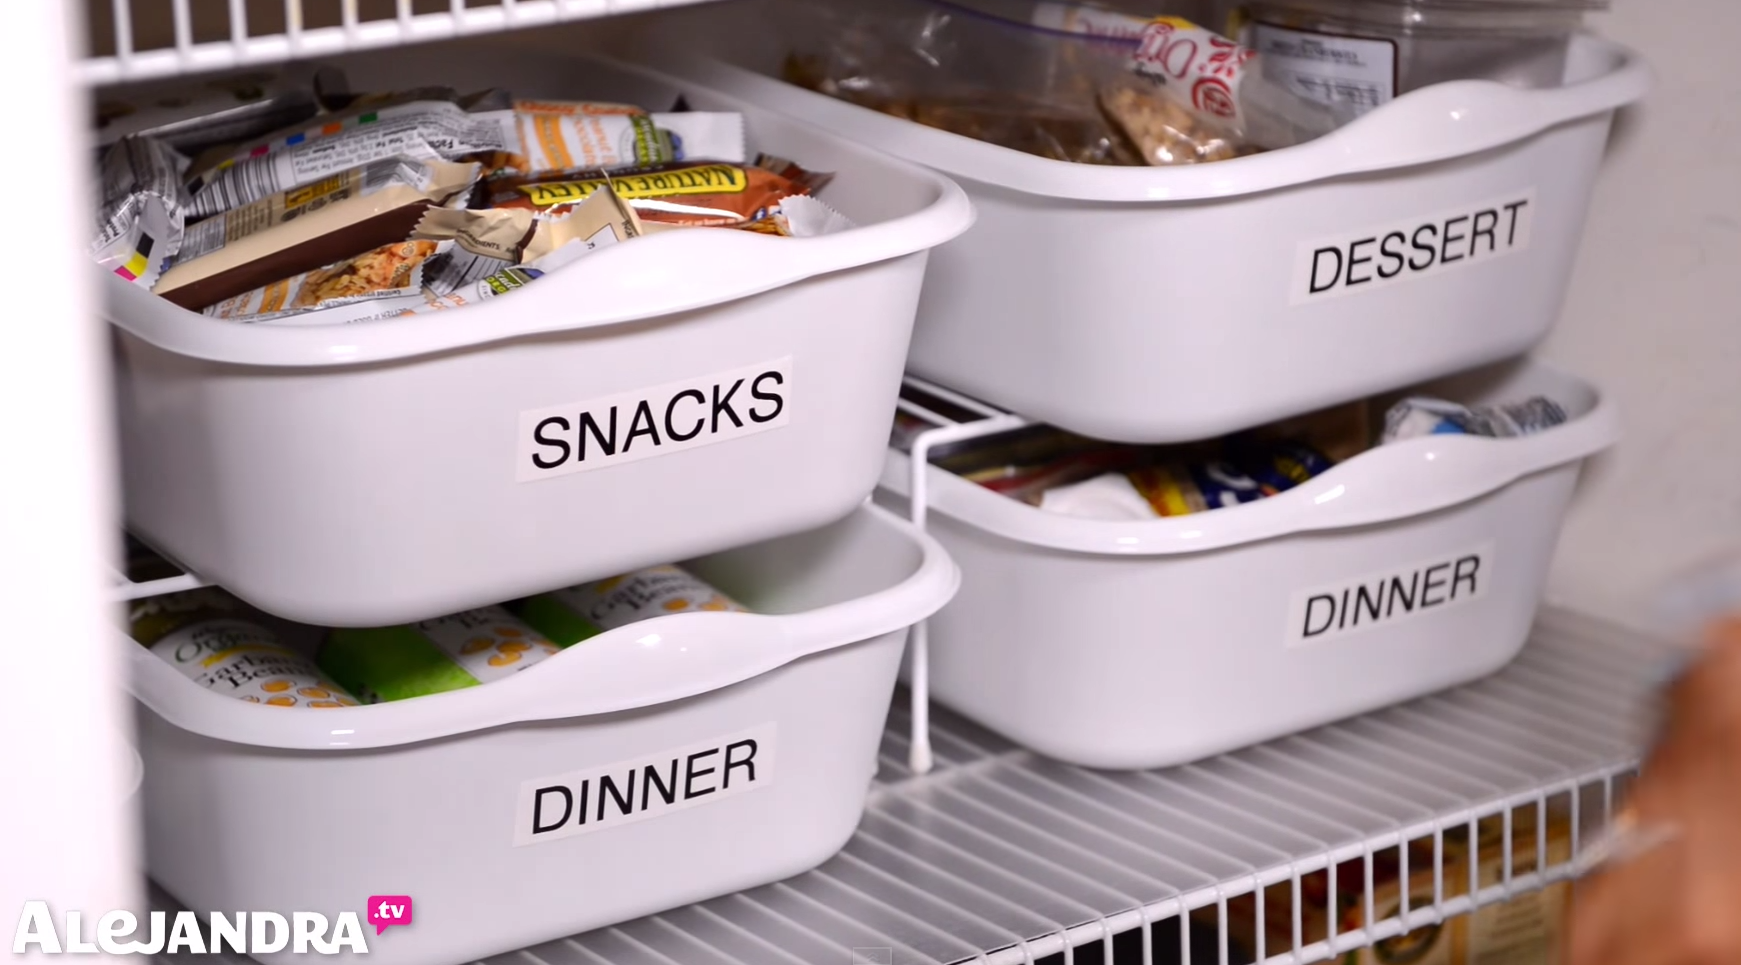 Cheap Pantry Organizing Tip: Use Dollar Store Dishpans to Organize Snack & Dinner Foods in the Pantry #AlejandraTV